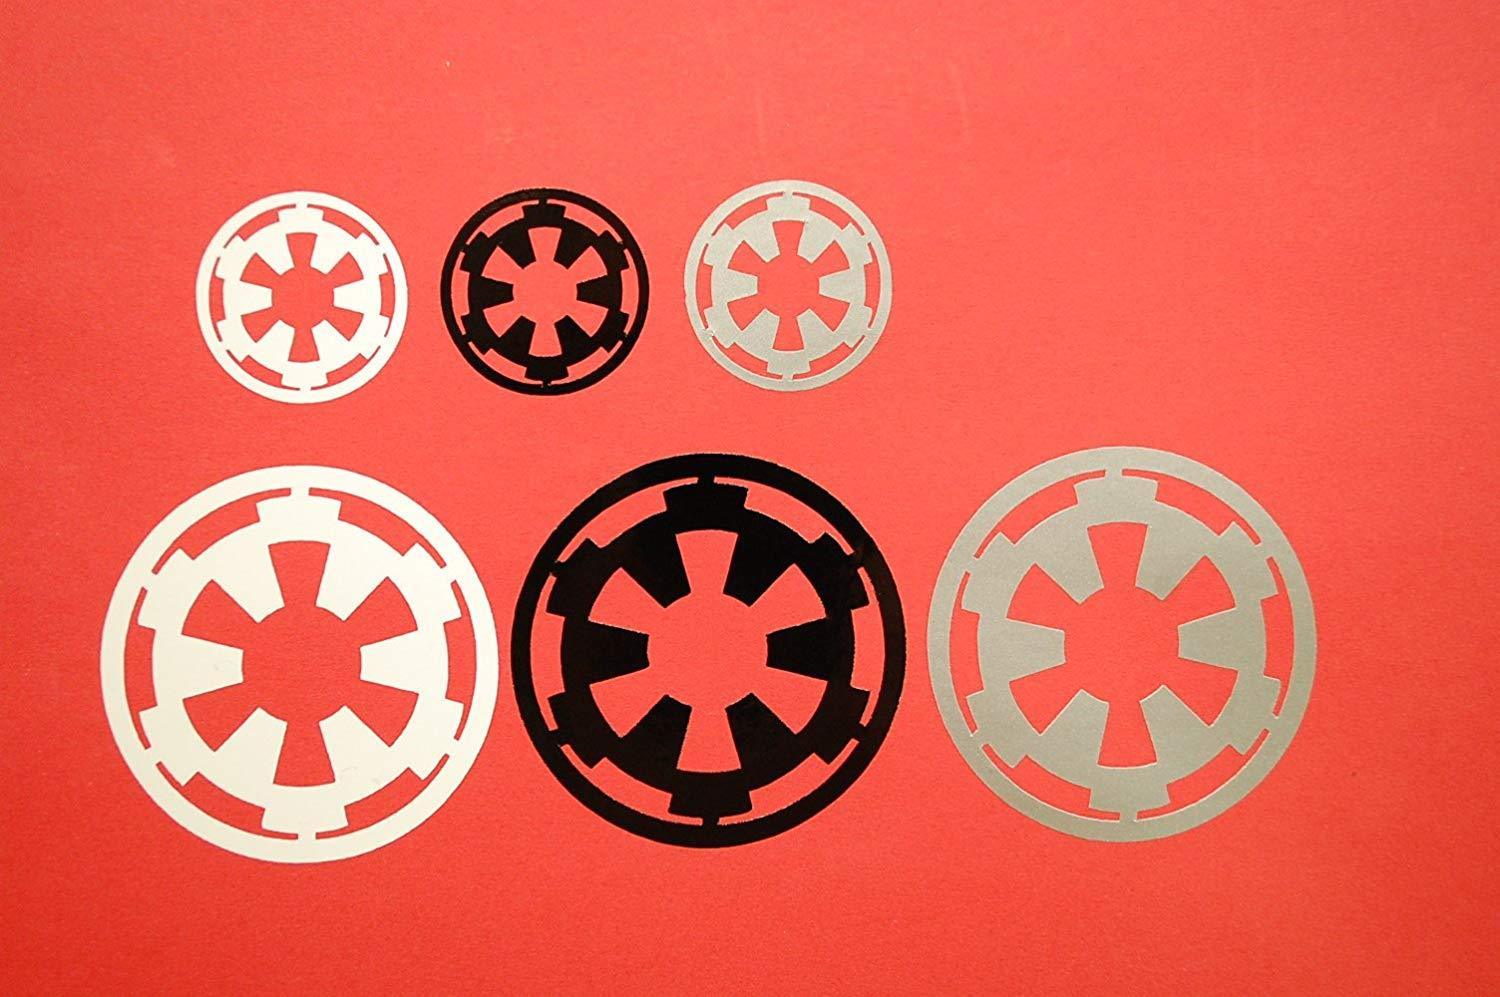 Imperail Logo - Set Of Star Wars Galactic Empire Imperial Logo Sticker Vinyl Decals (Six  Pack!) White, Black,Silver 1